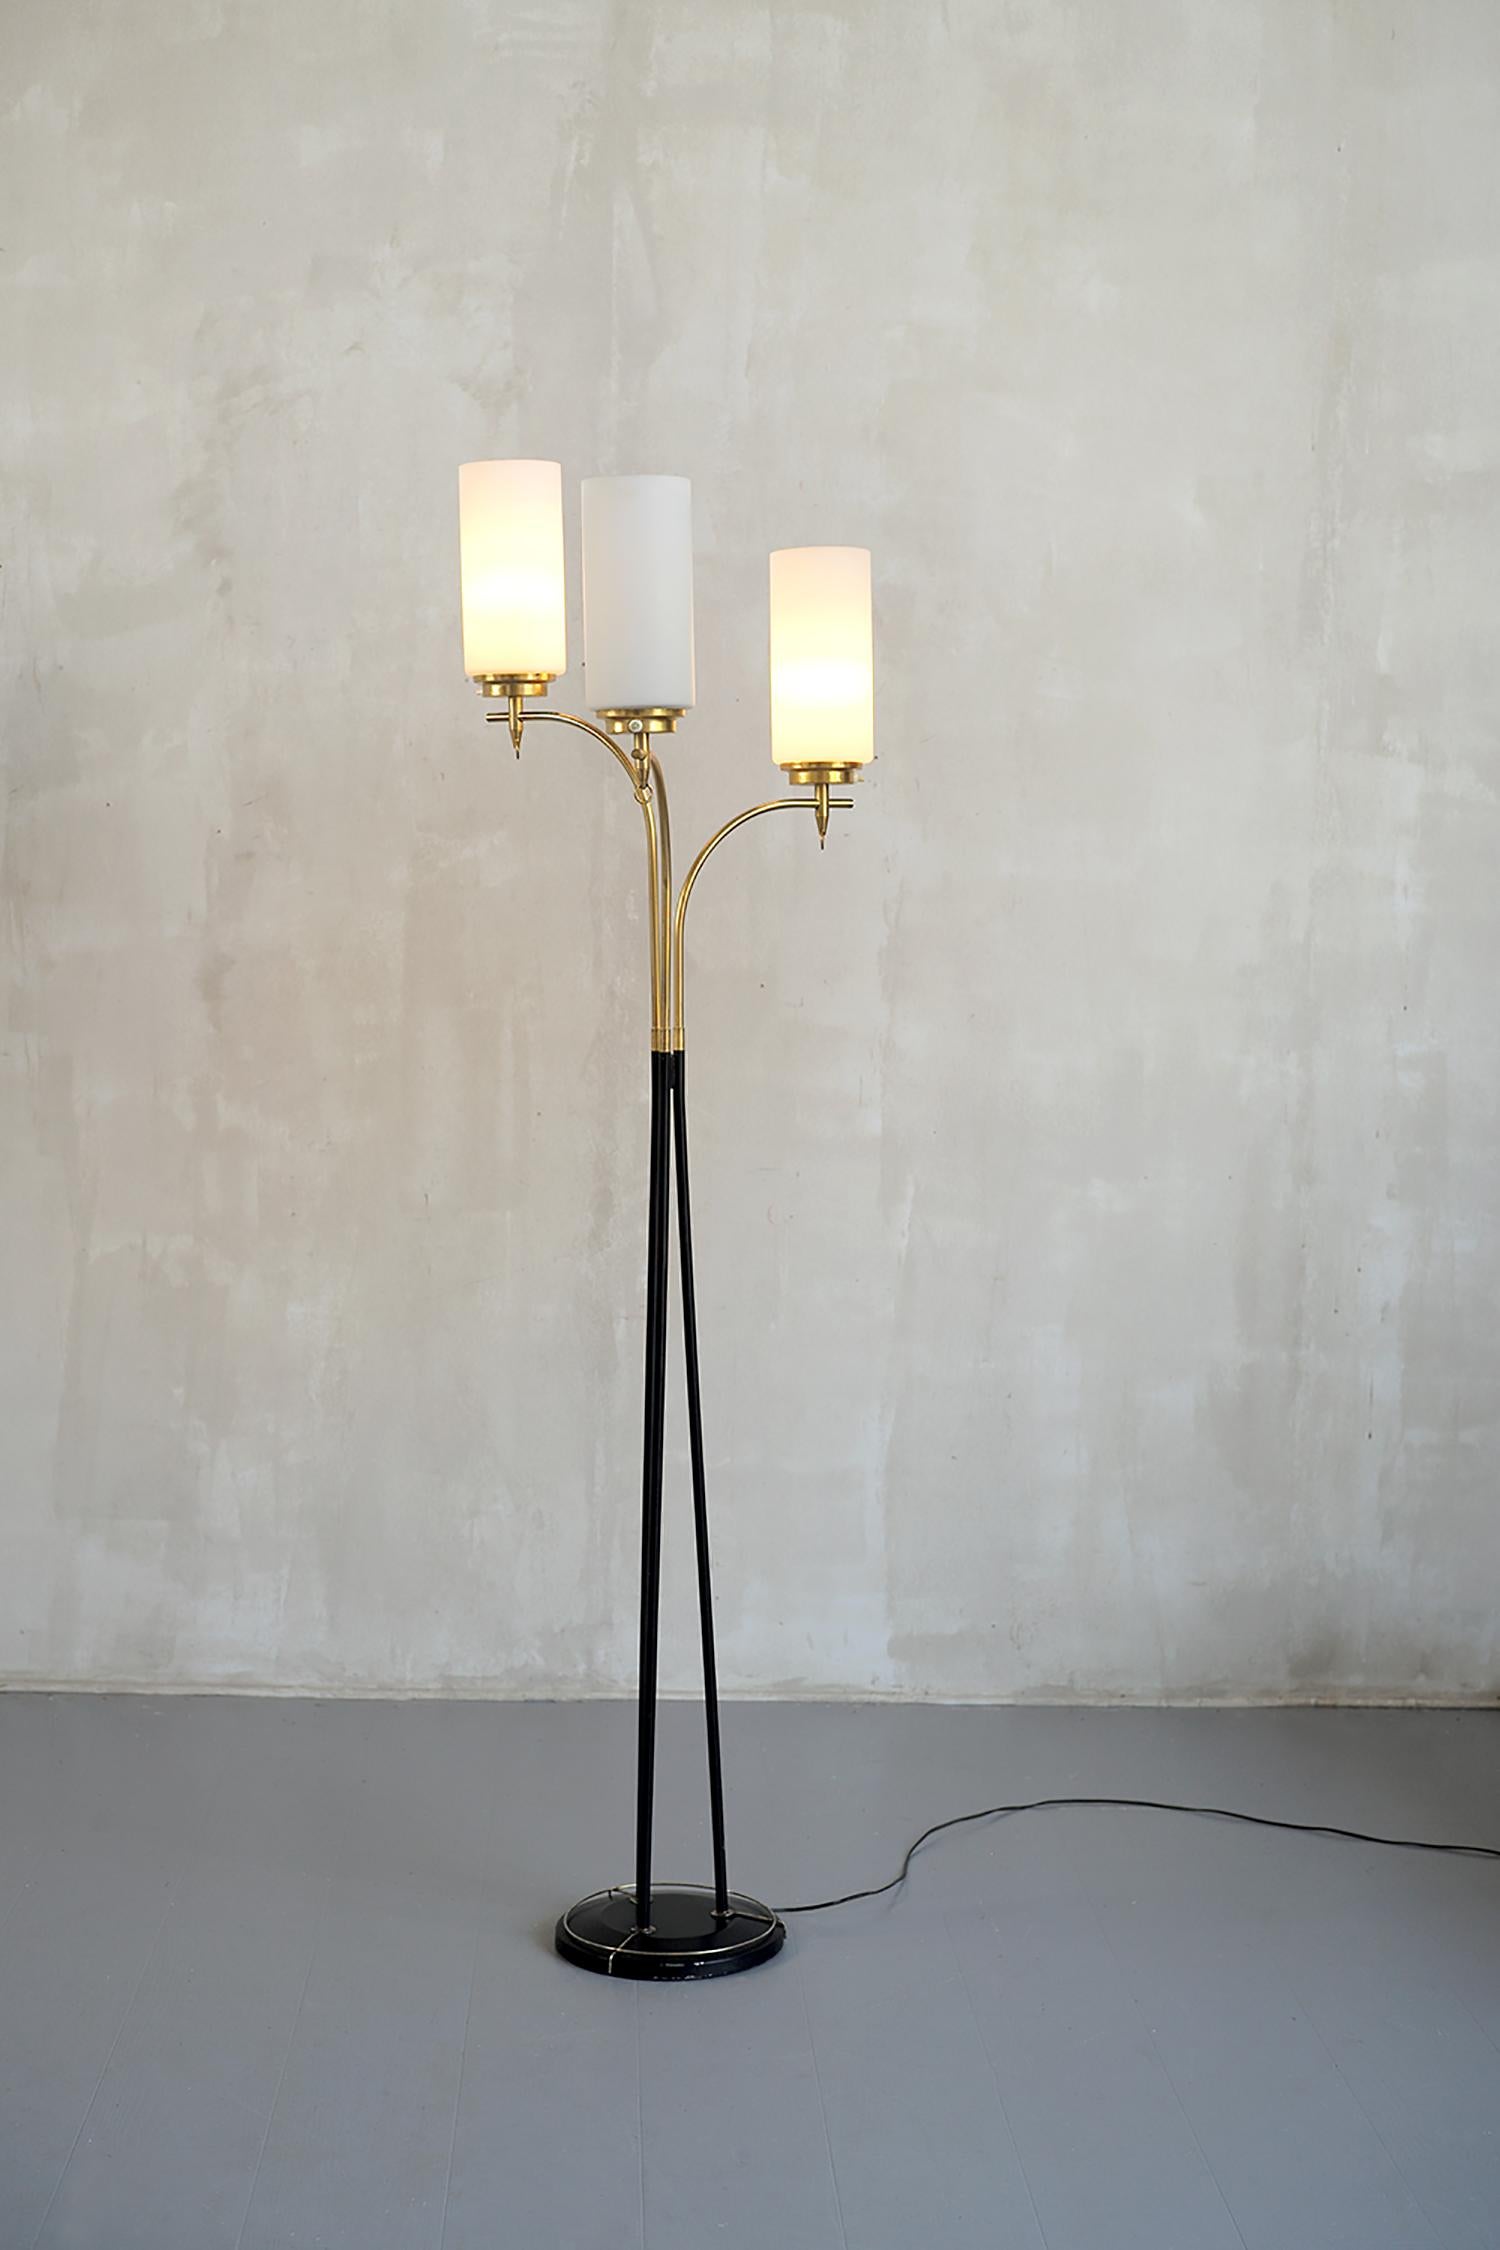 20th Century Floor Lamp with Three Lights, France, 1950 For Sale